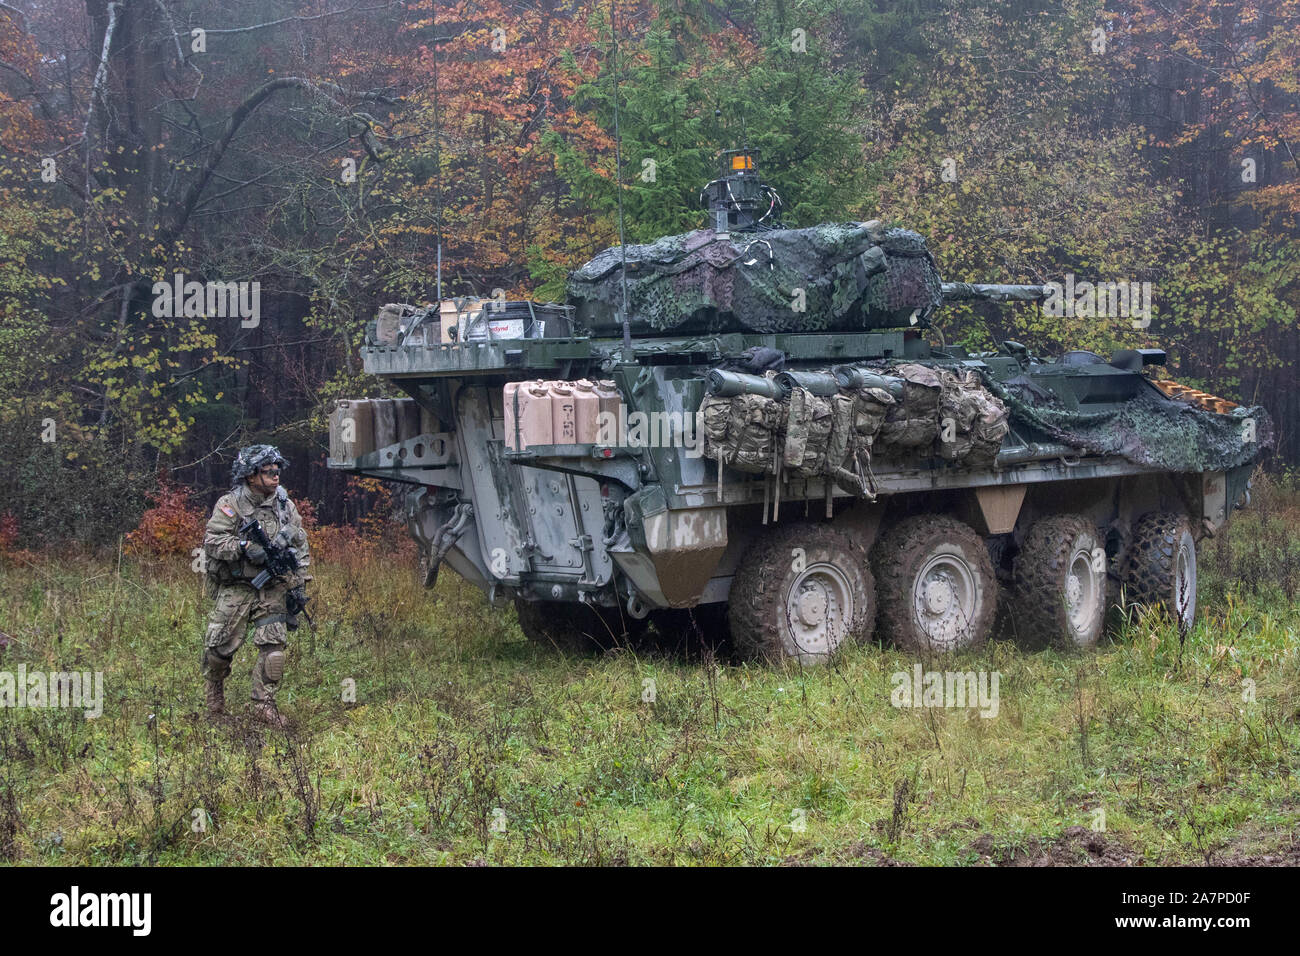 A U.S. Army Soldier assigned to Comanche Troop, 1st Squadron, 2d Cavalry Regiment dismounts from his Stryker Infantry Carrier Vehicle - Dragoon during Dragoon Ready 20 at the Joint Multinational Readiness Center in Hohenfels, Germany, Nov. 3, 2019. Dragoon Ready is a 7th Army Training Command led exercise designed to ensure readiness and certify 2CR Soldiers in NATO combat readiness and unified land operations. (Photo by Spc. Ethan Valetski, 5th Mobile Public Affairs Detachment) Stock Photo